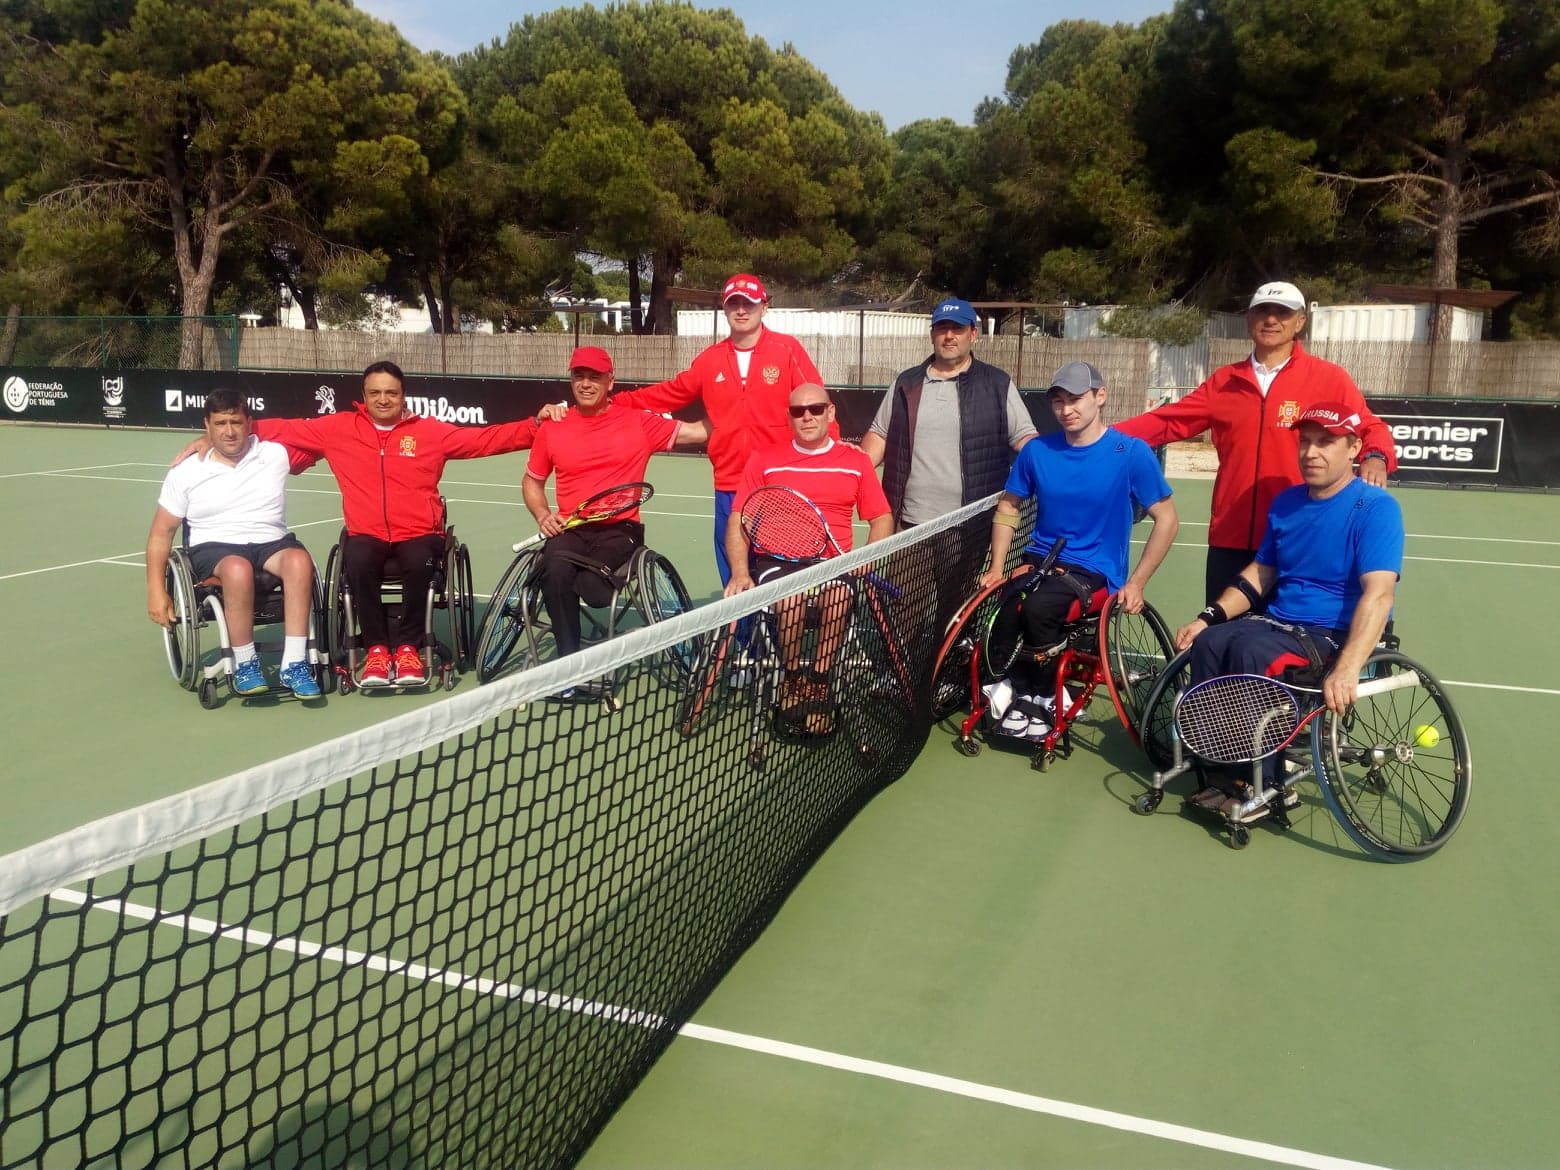 Hosts Portugal whitewashed by Russia as ITF World Team Cup European Qualifier begins 